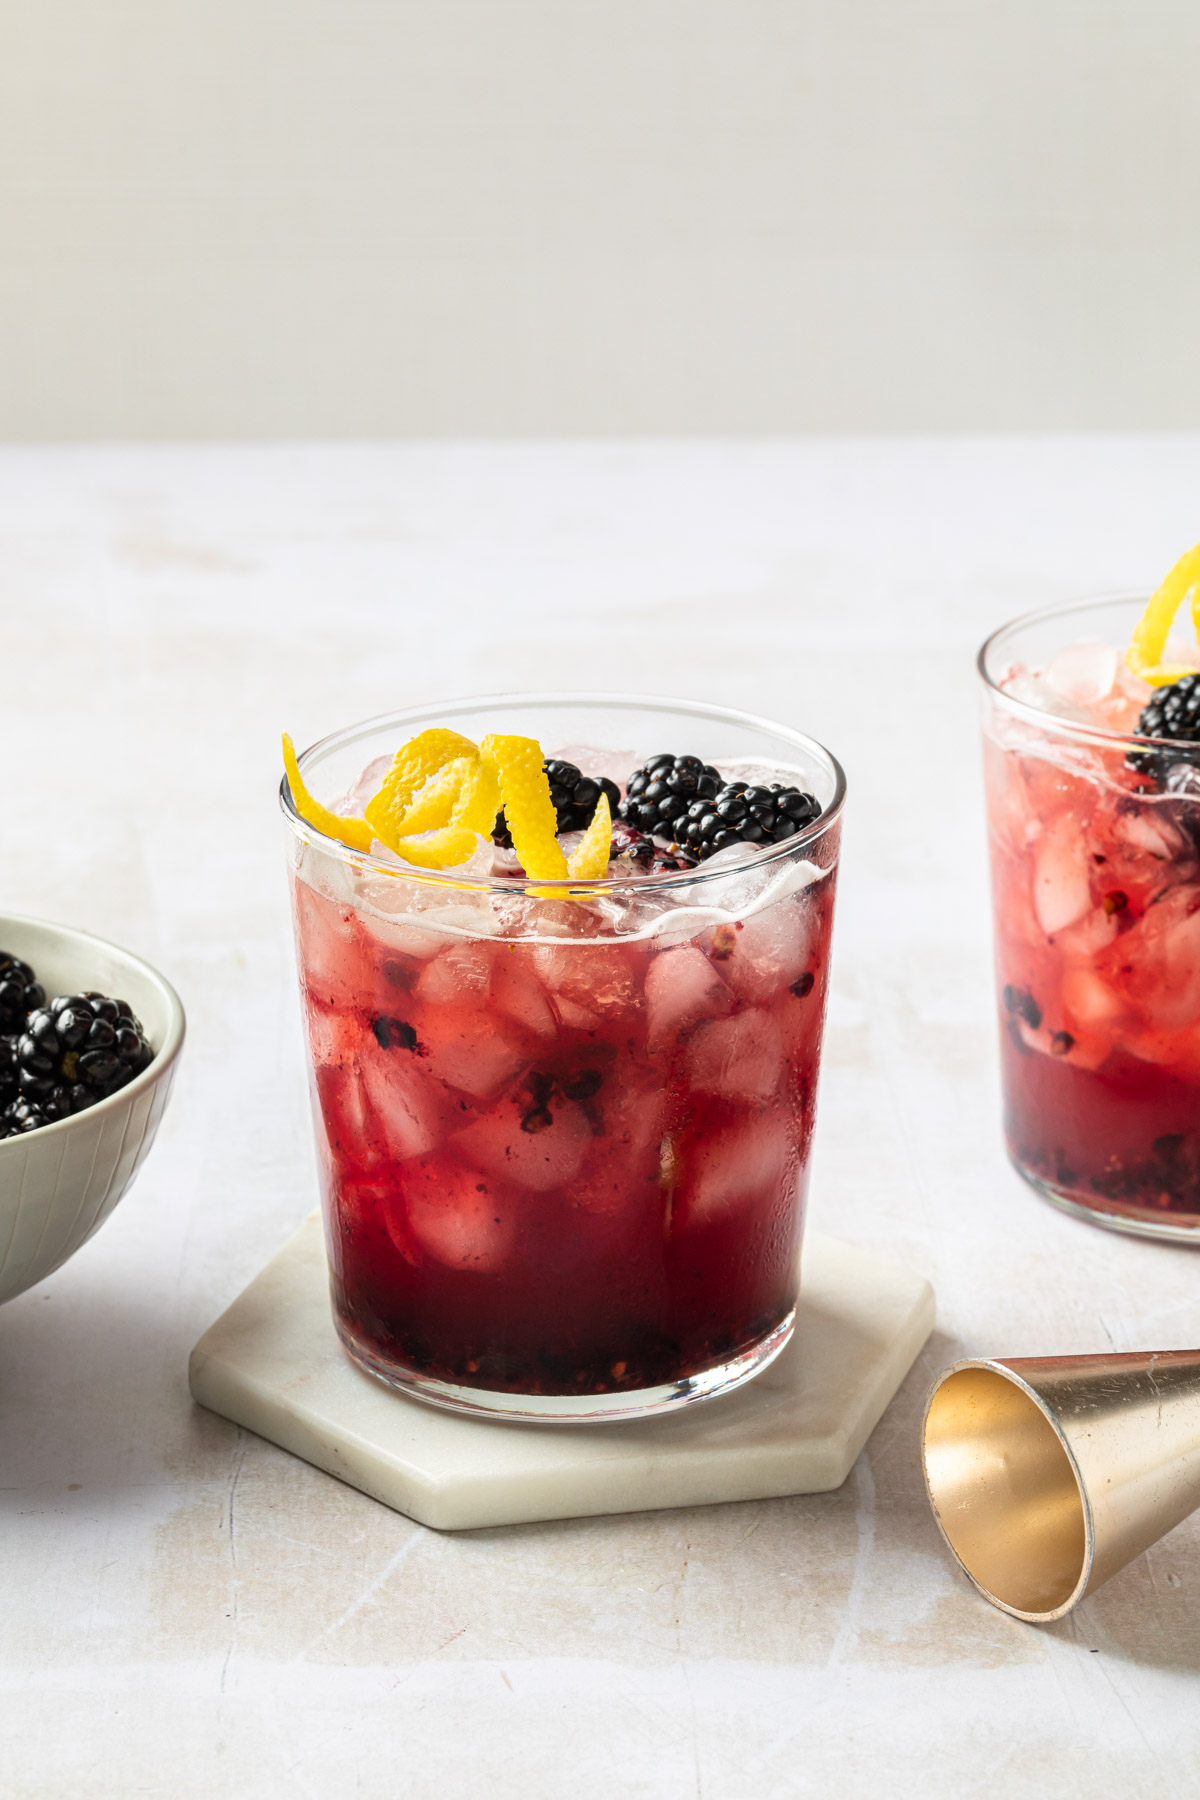 Blackberry bramble cocktails on ice, garnished with blackberries and a lemon twist.